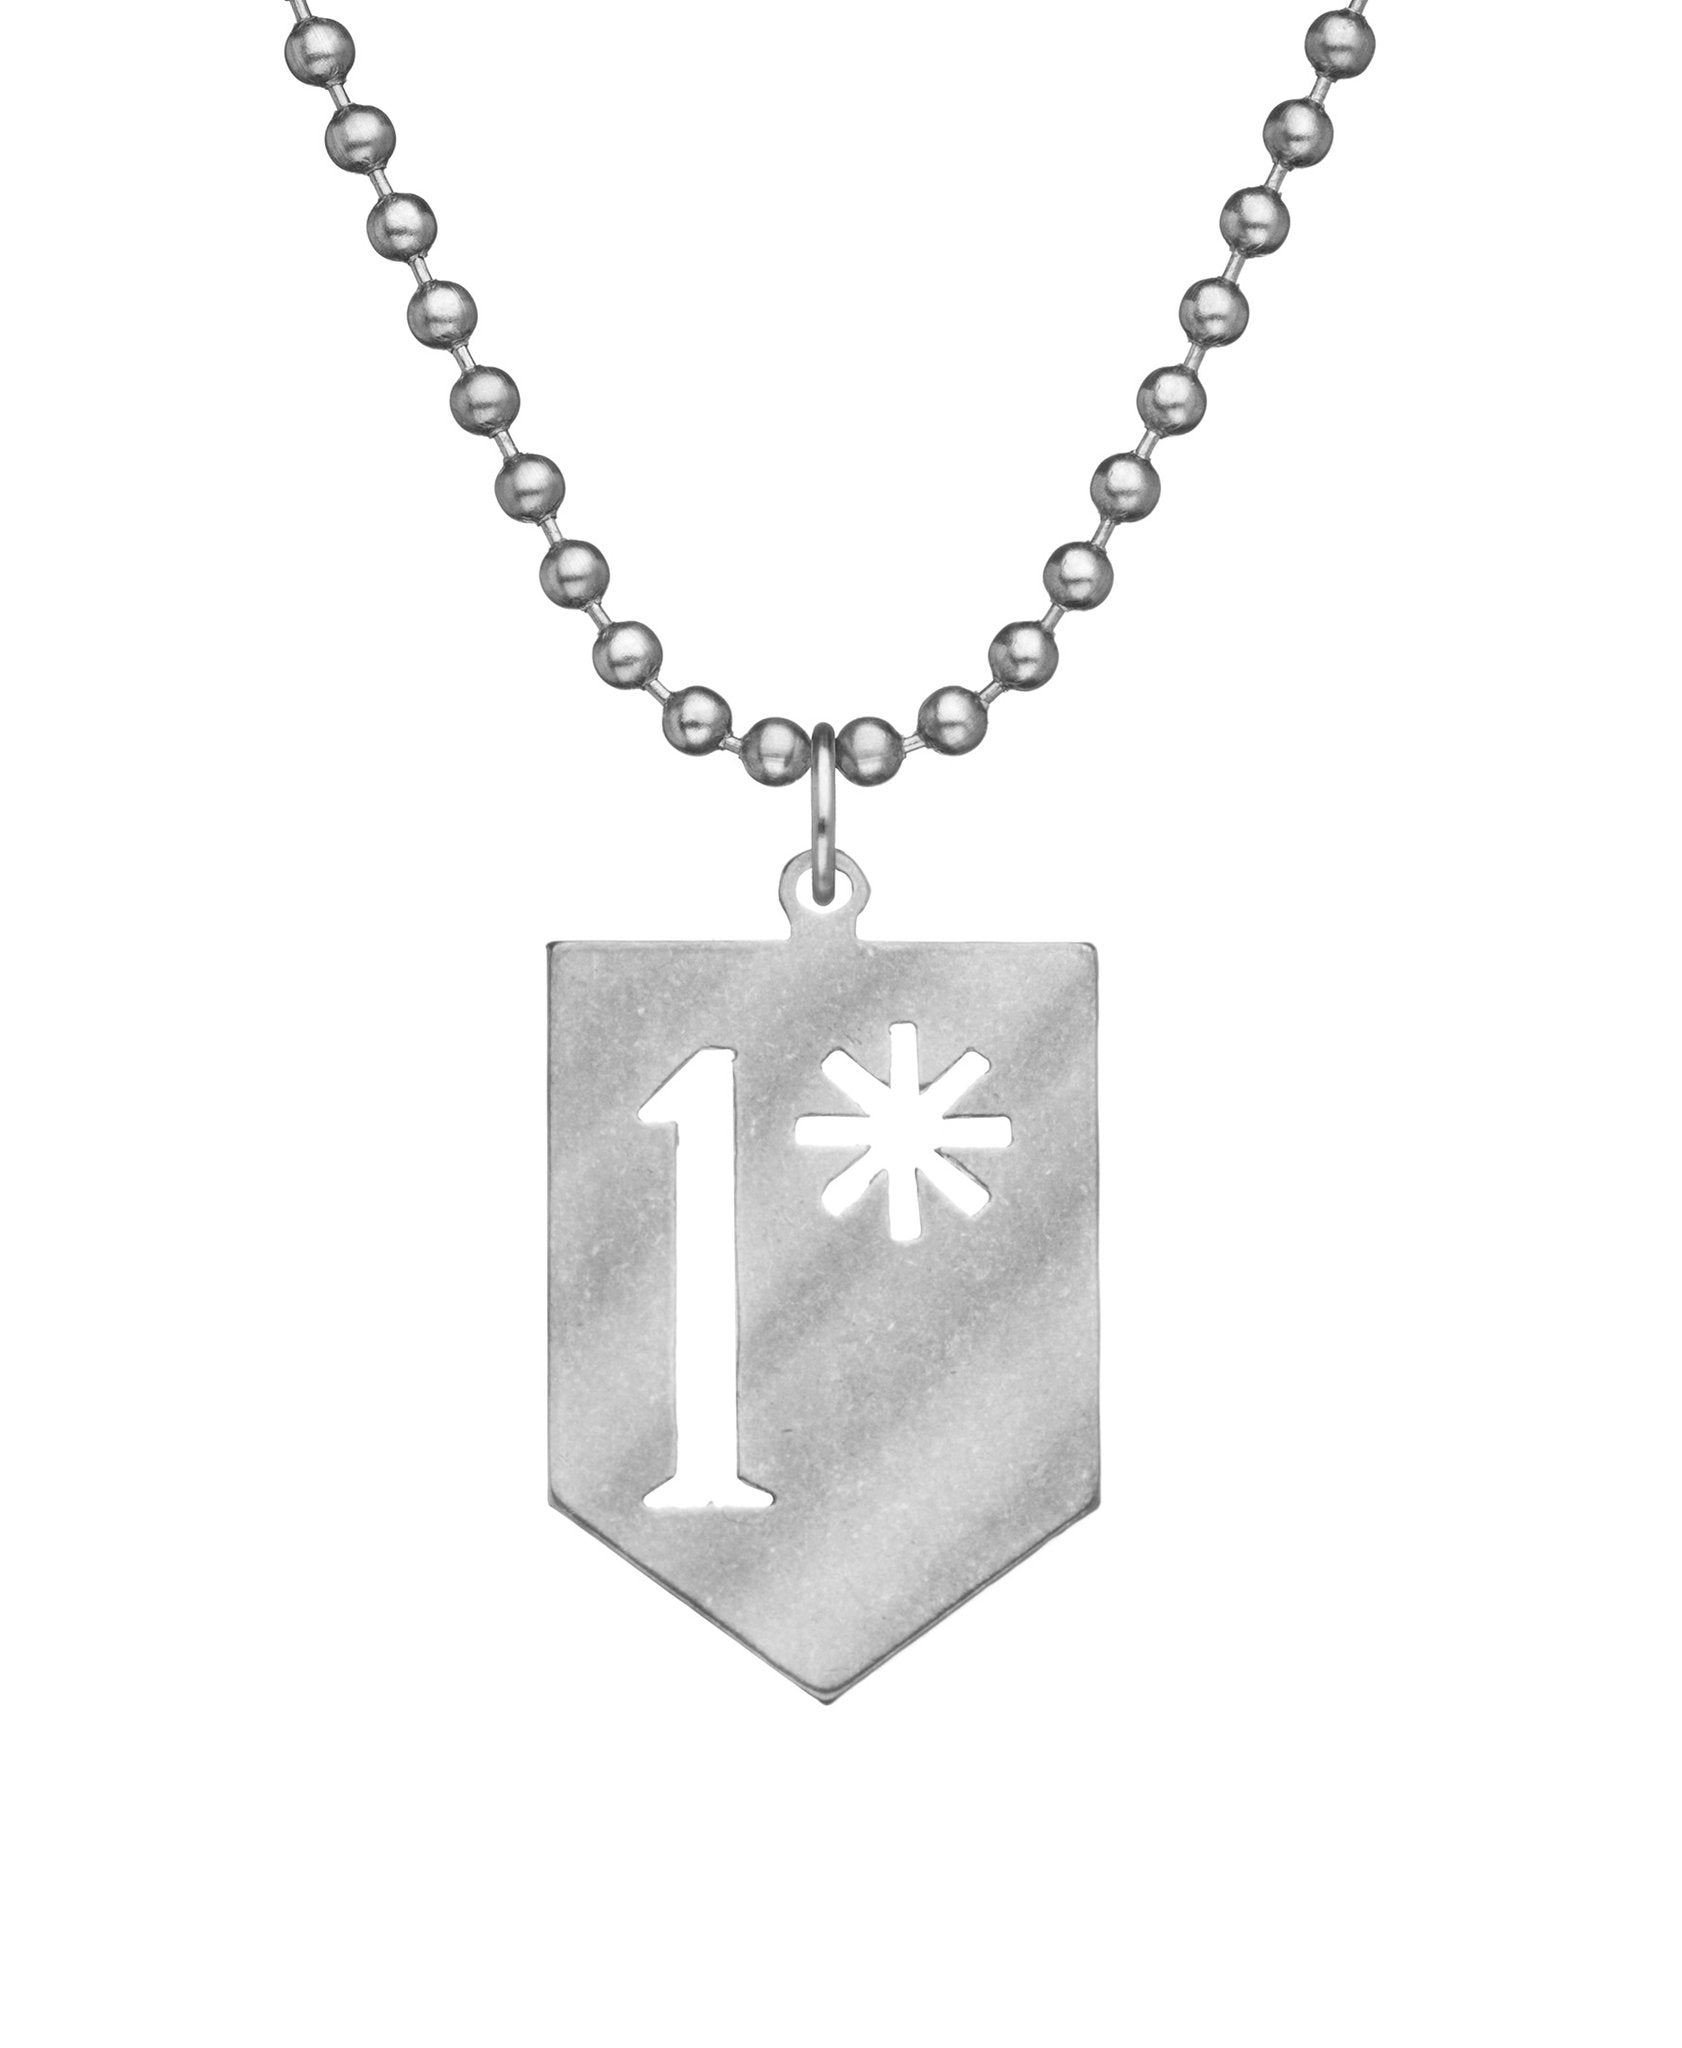 Military Issue 1 Asterisk Necklace with Dog Tag Chain